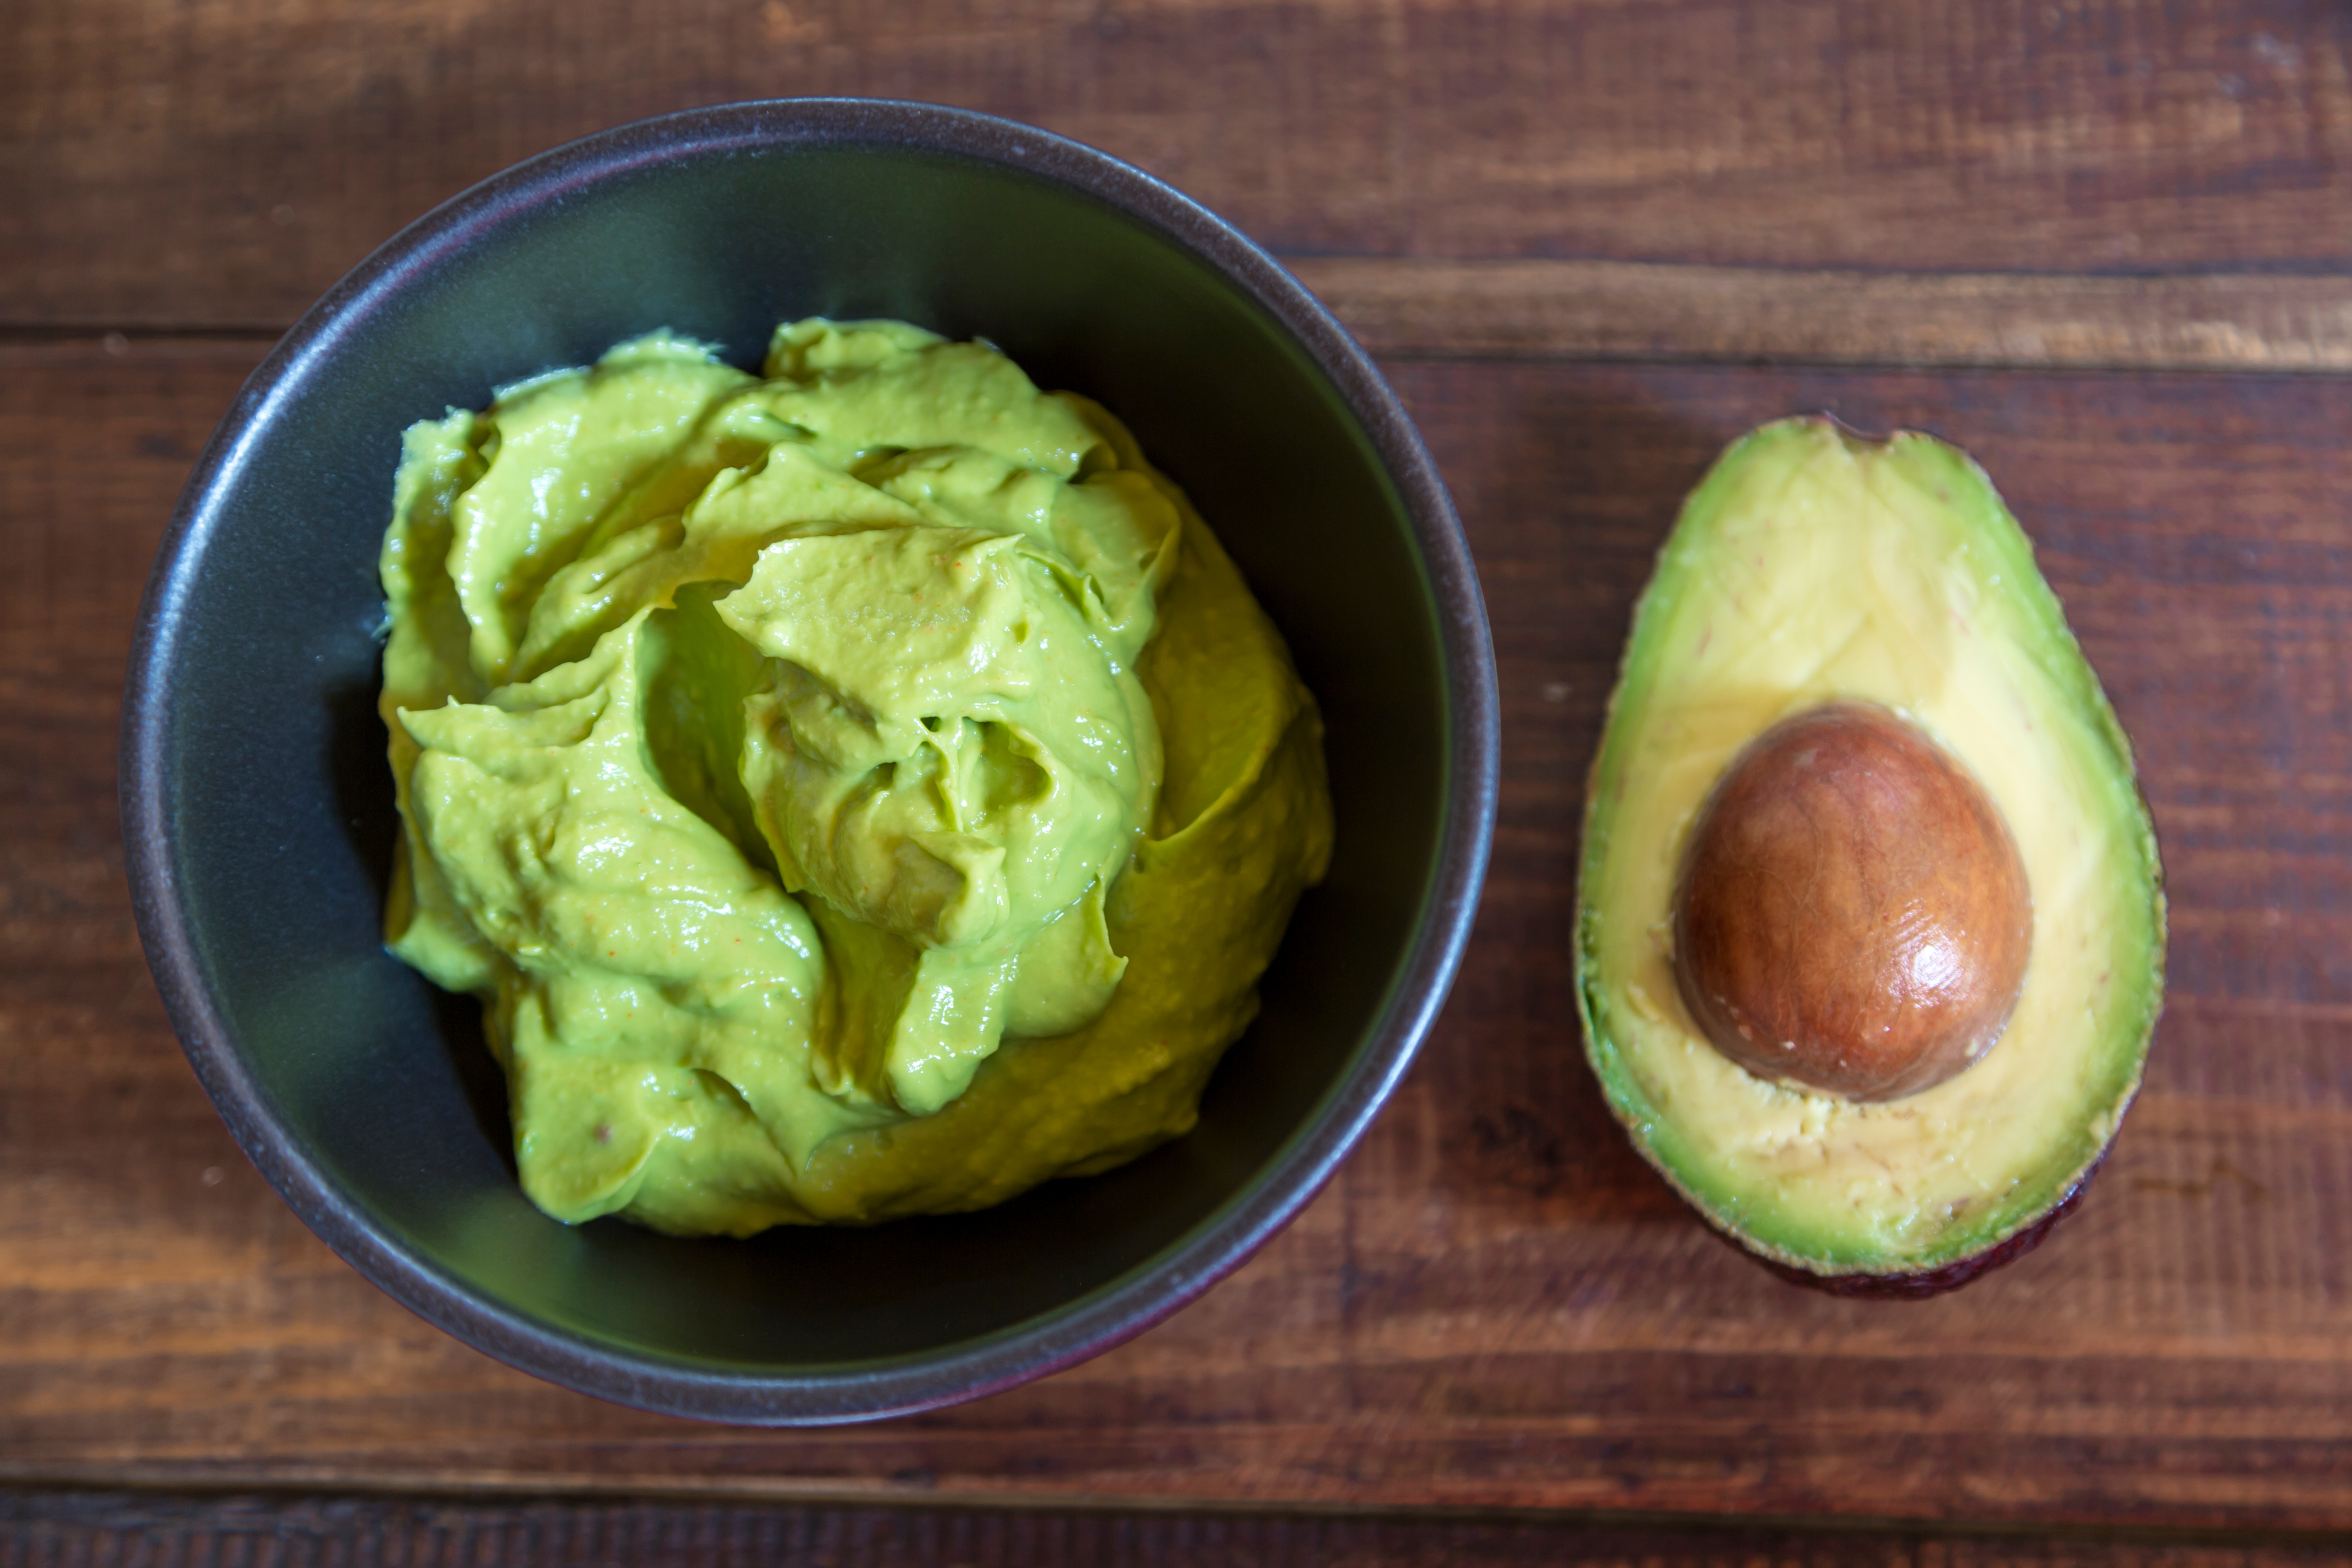 Eating avocado before a night out can help stave off a hangover